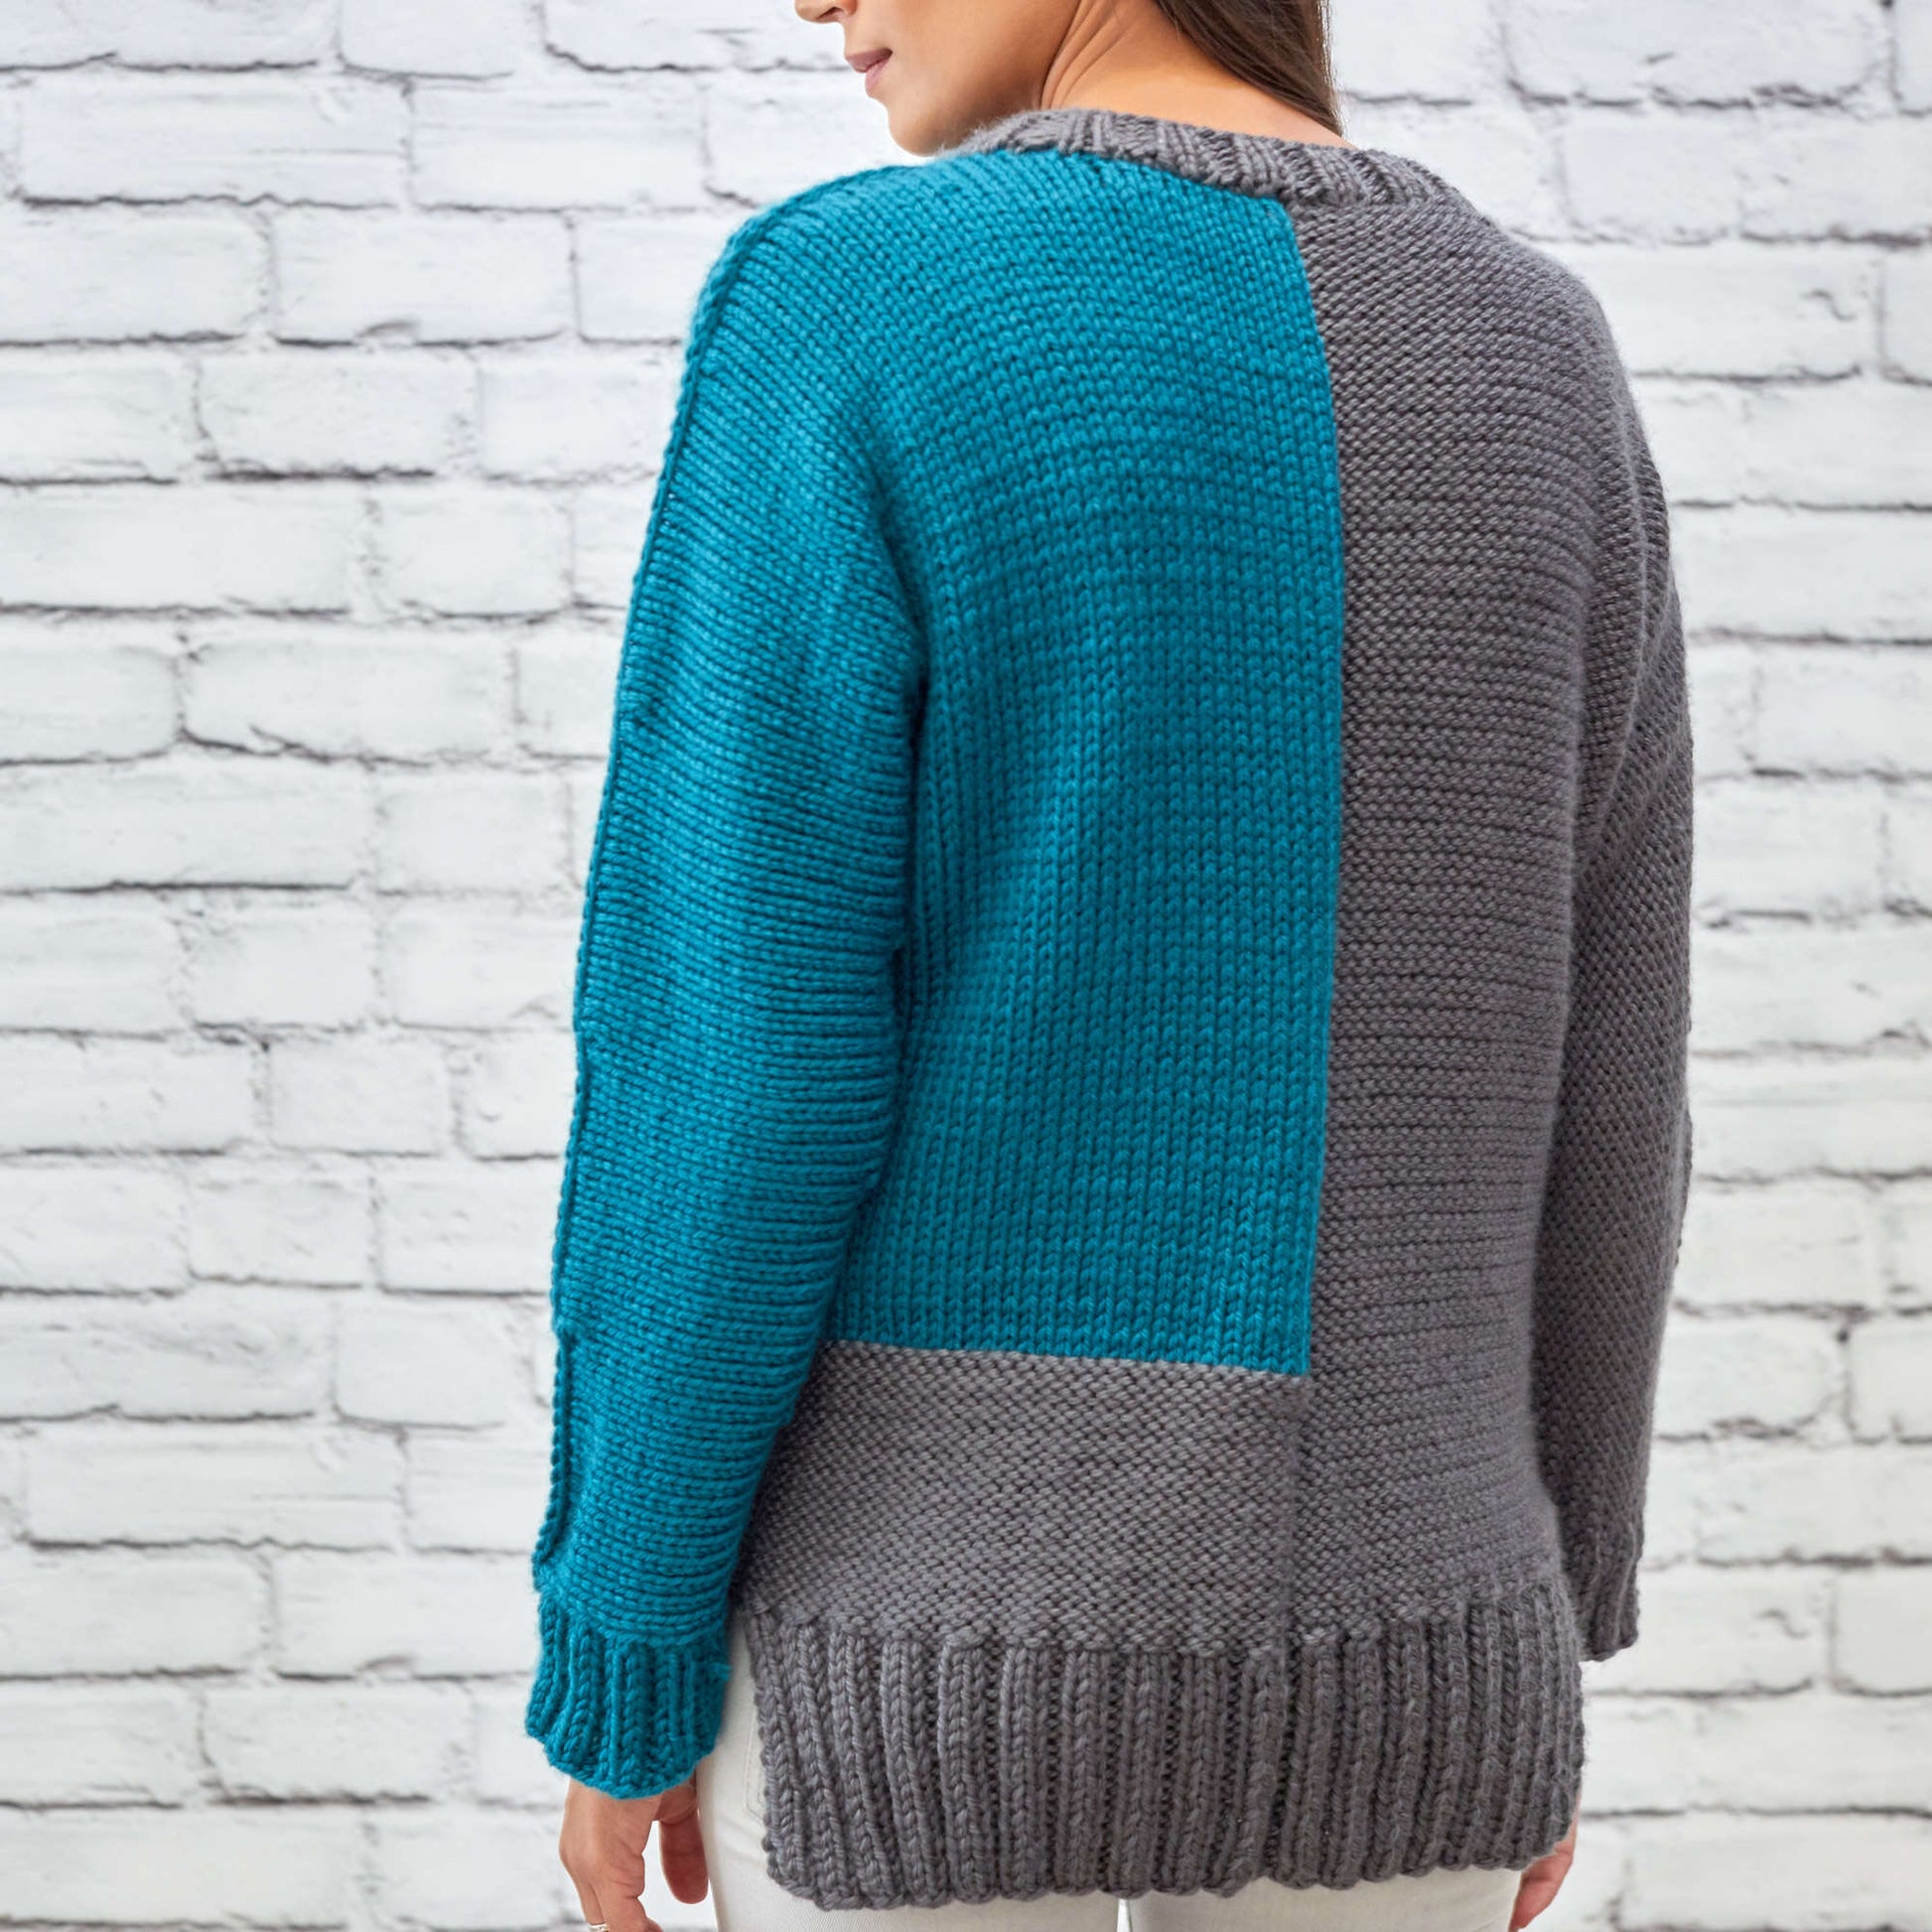 Free Red Heart Knit Contrast Pullover Pattern